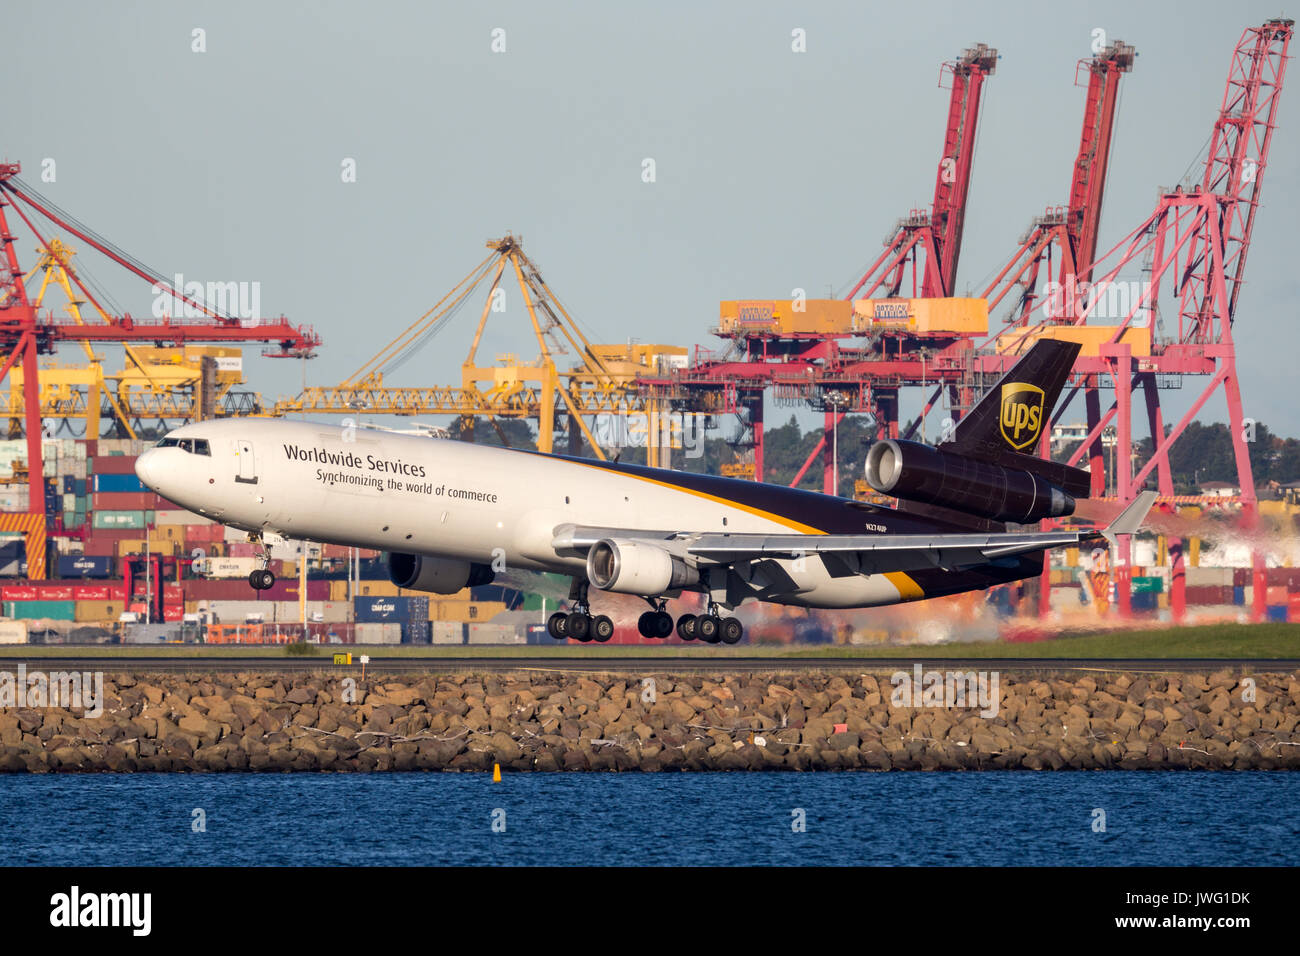 United Parcel Service McDonnell Douglas MD-11 cargo aircraft landing at Sydney Airport. Stock Photo